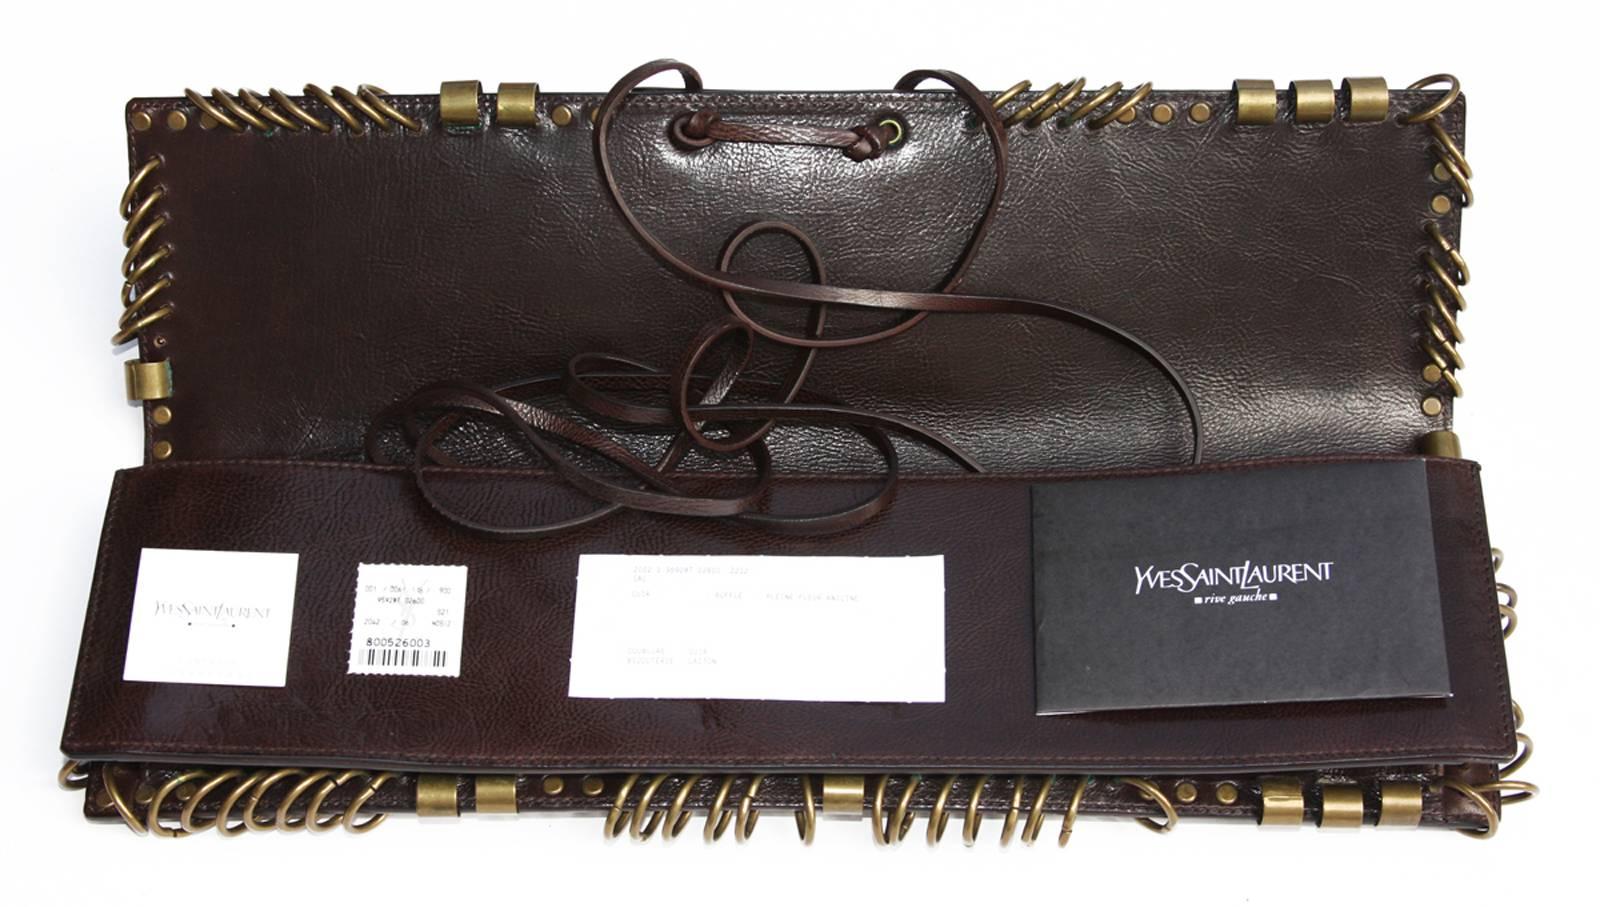 Very Rare brown leather Clutch with brass hardware designed by Tom Ford for Yves Saint Laurent dating to Spring of 2002.

Measurements: L - 14 inches, H - 4 inches.
N 95928-000926
Brand New with Tag
Excellent Condition.
Natural aged on brass